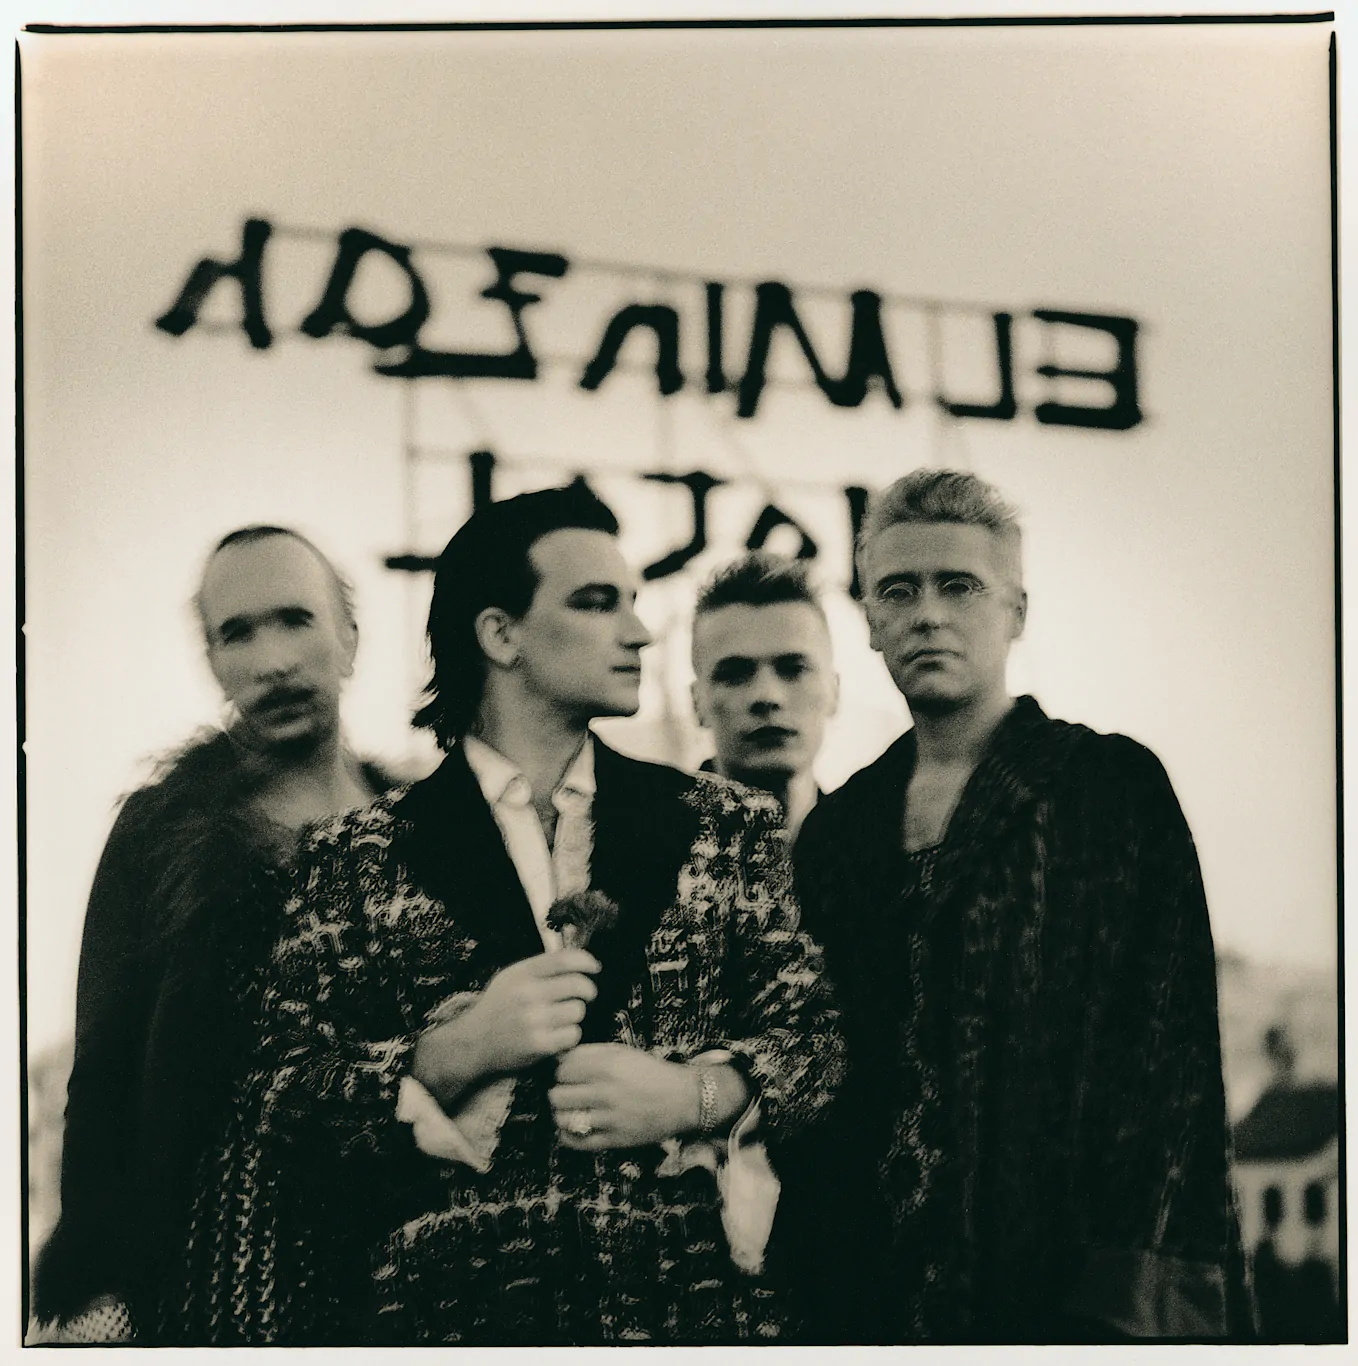 U2 announce the 30th Anniversary Edition release of their seminal album Achtung Baby